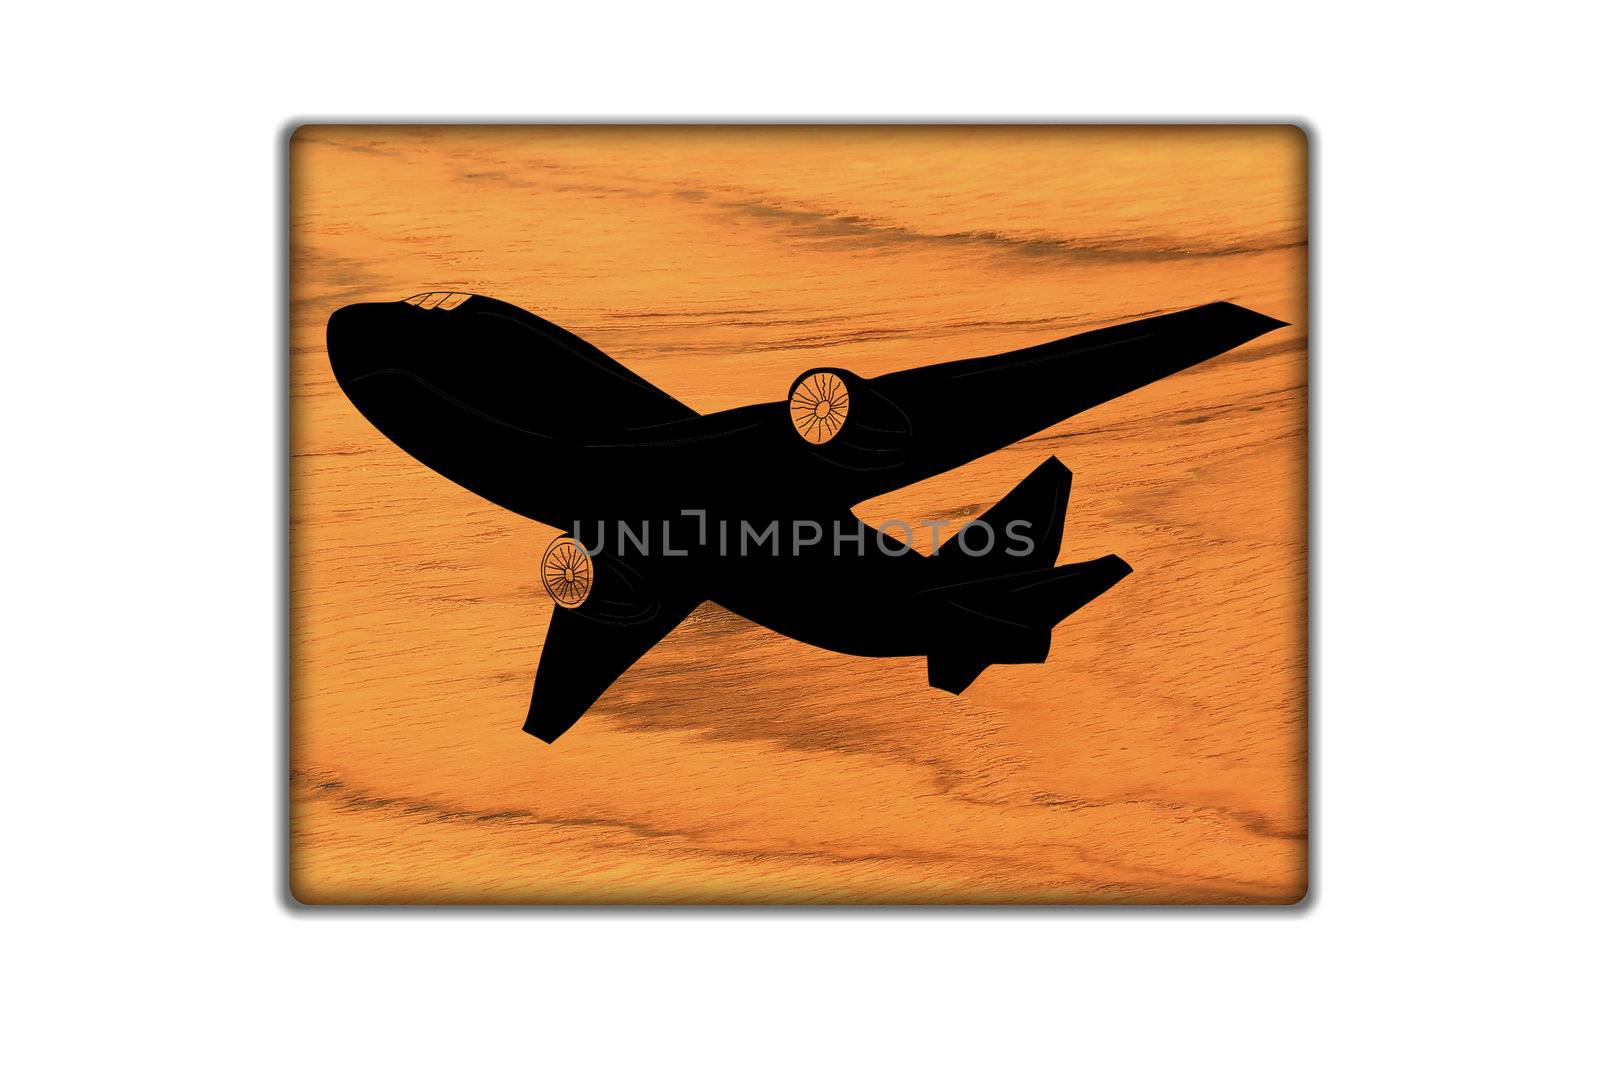 Airplane Sign icon on wood texture and background by rufous